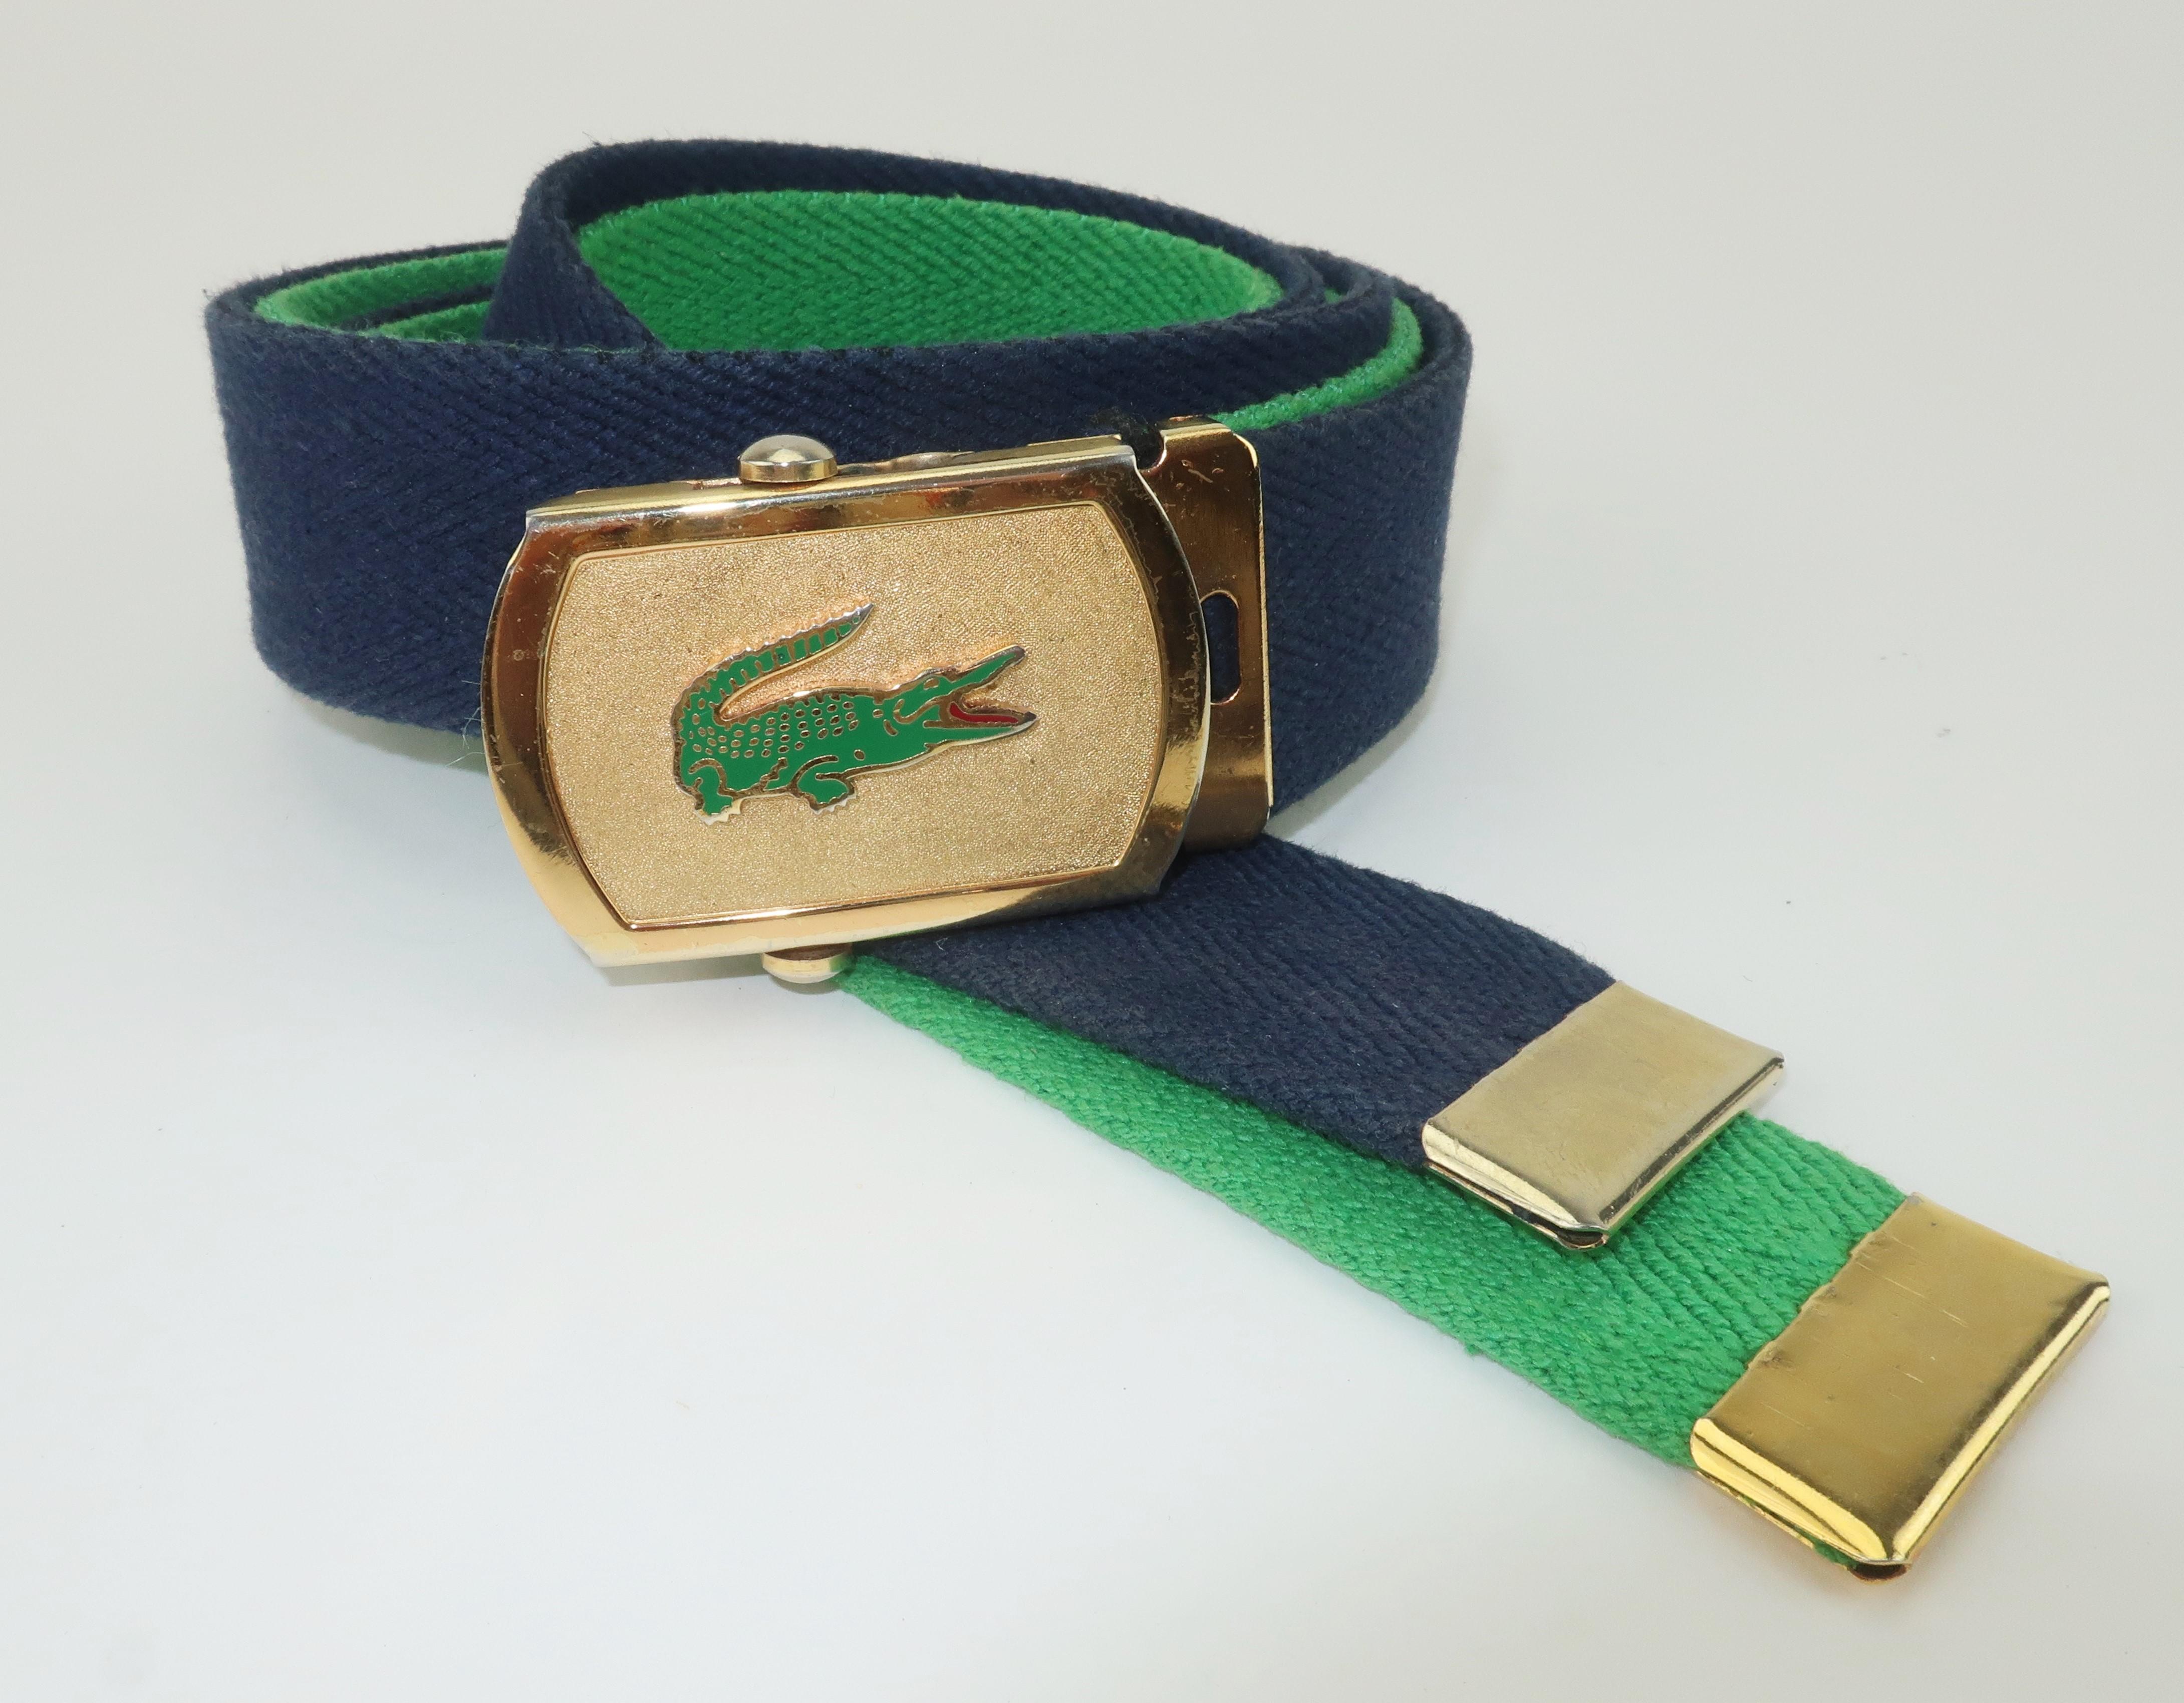 An alligator that never goes out of style!  A classic preppy look from the iconic brand, Izod Lacoste, consisting of an Italian made gold tone buckle and two belts in navy blue and green.  The slide buckle mechanism and clamp make for an easy quick